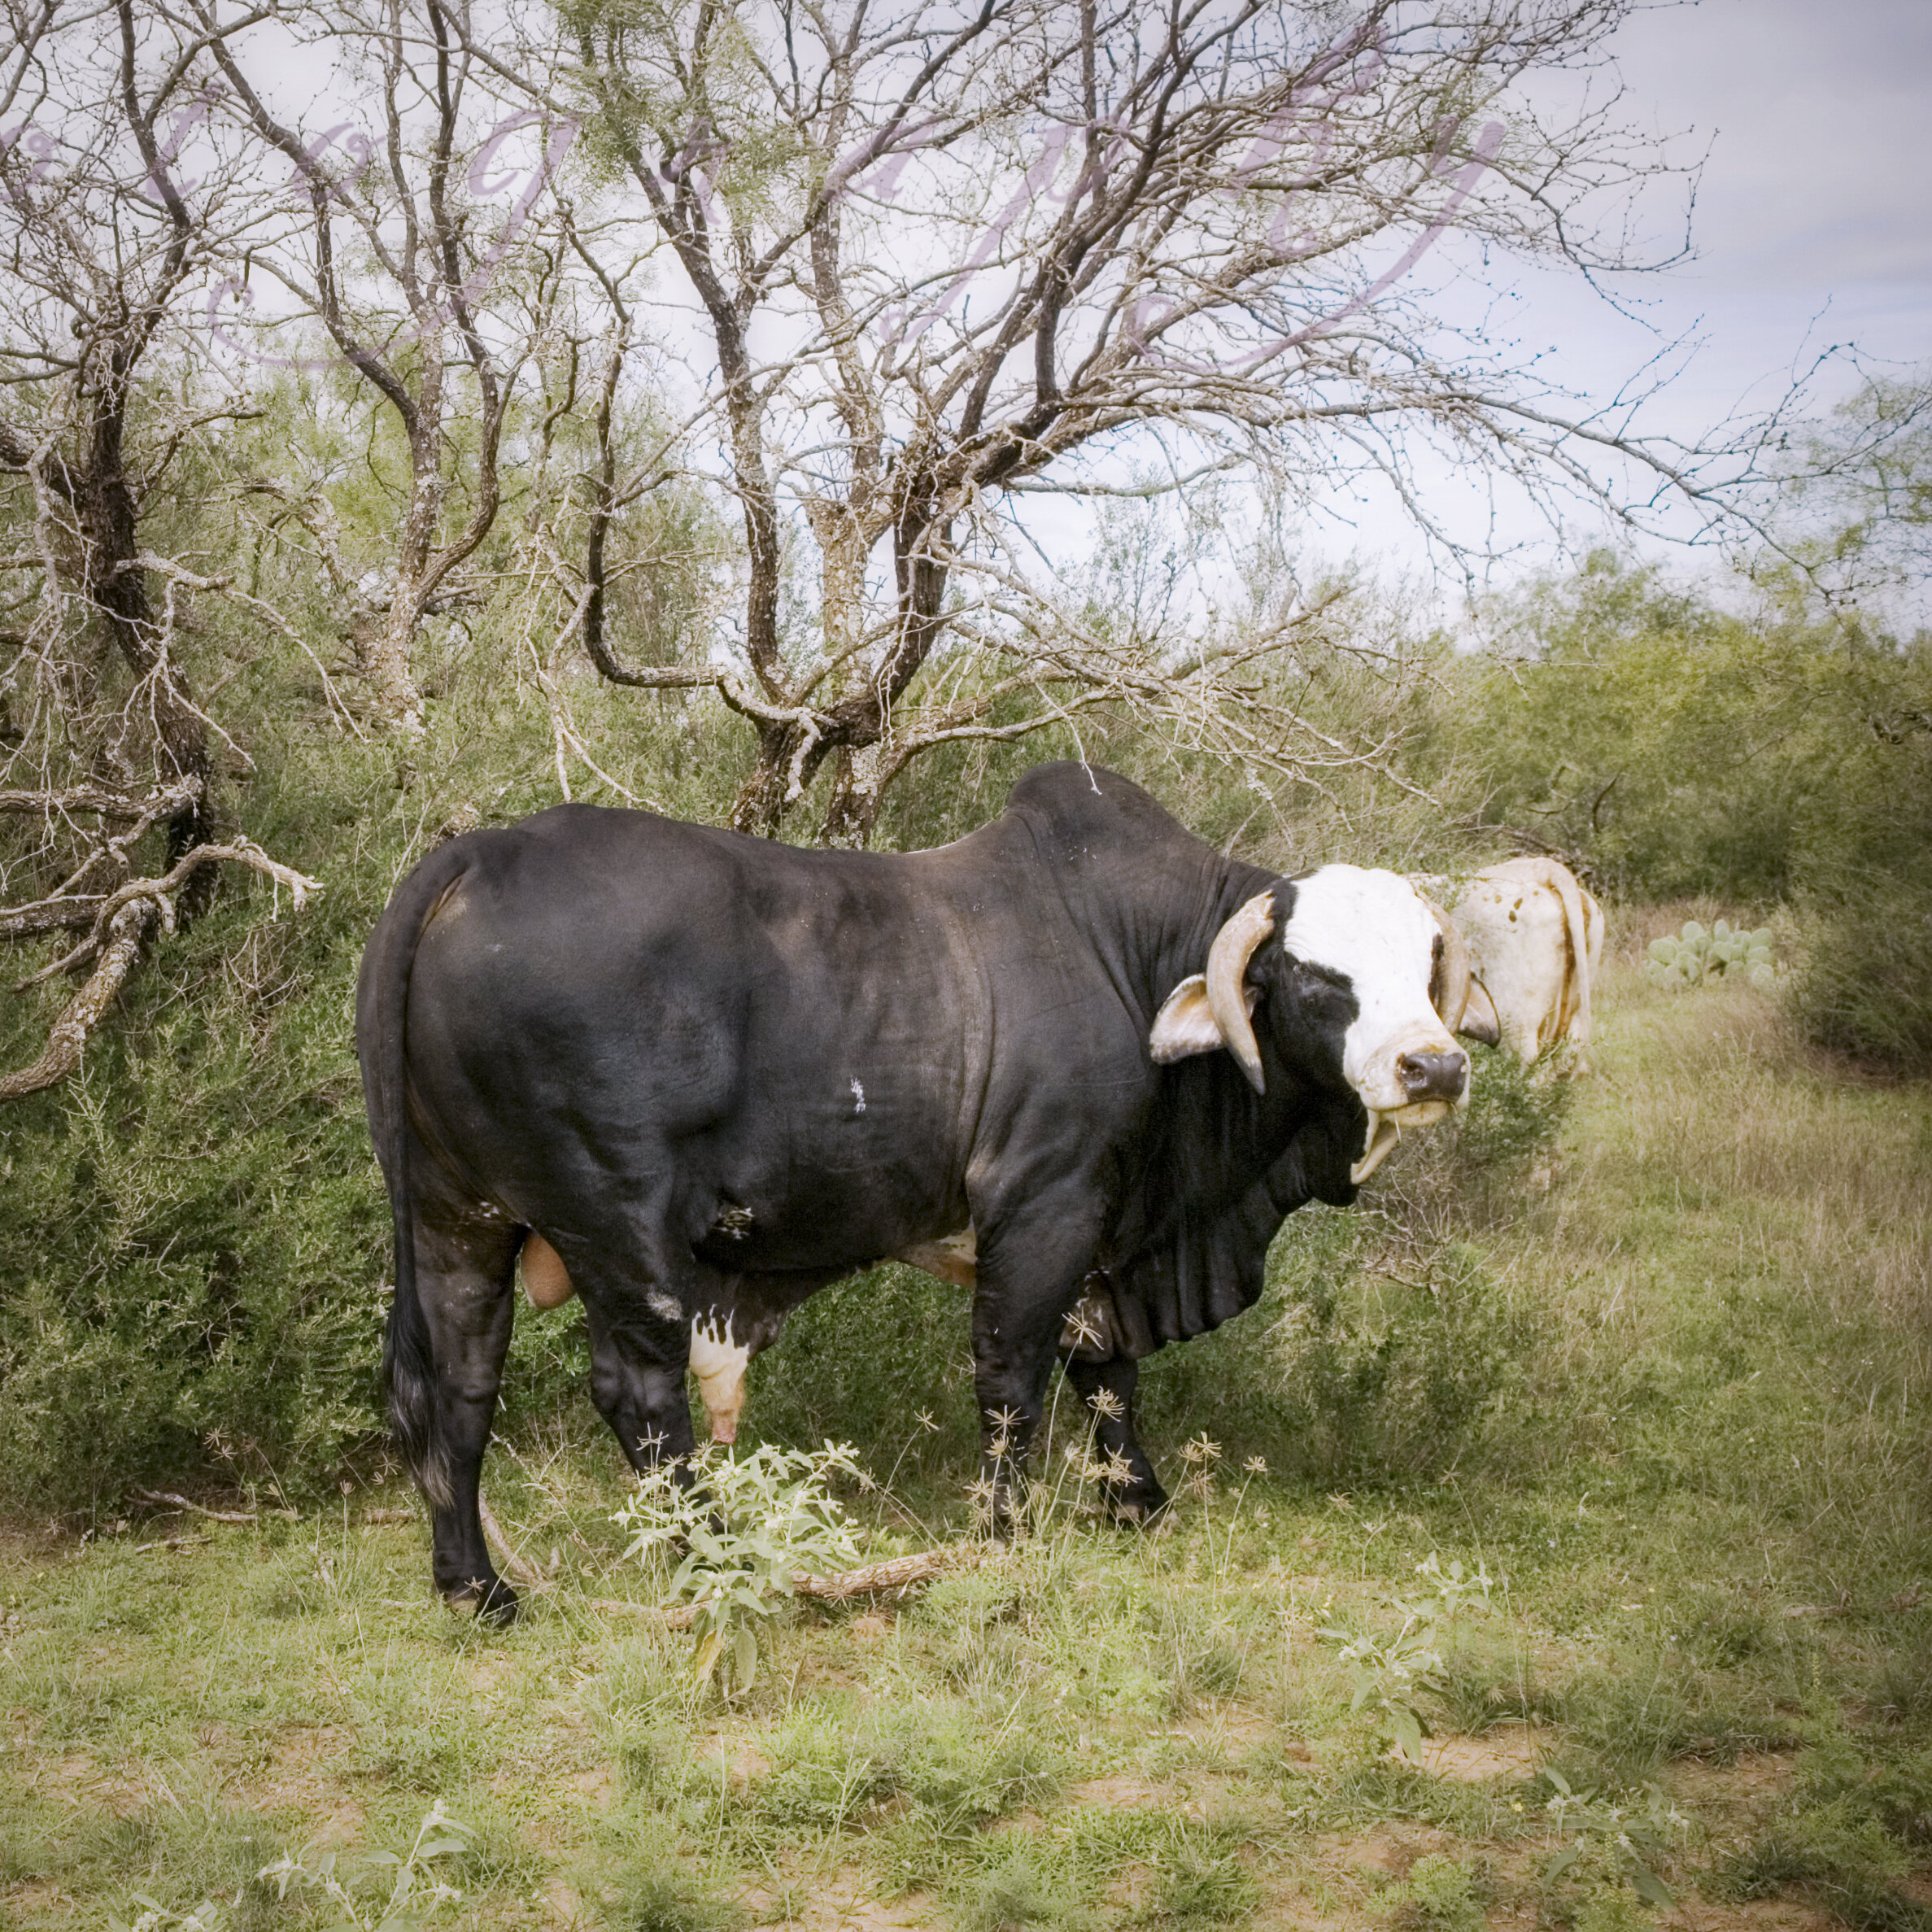 The Vintage Kate shoots cows in Texas